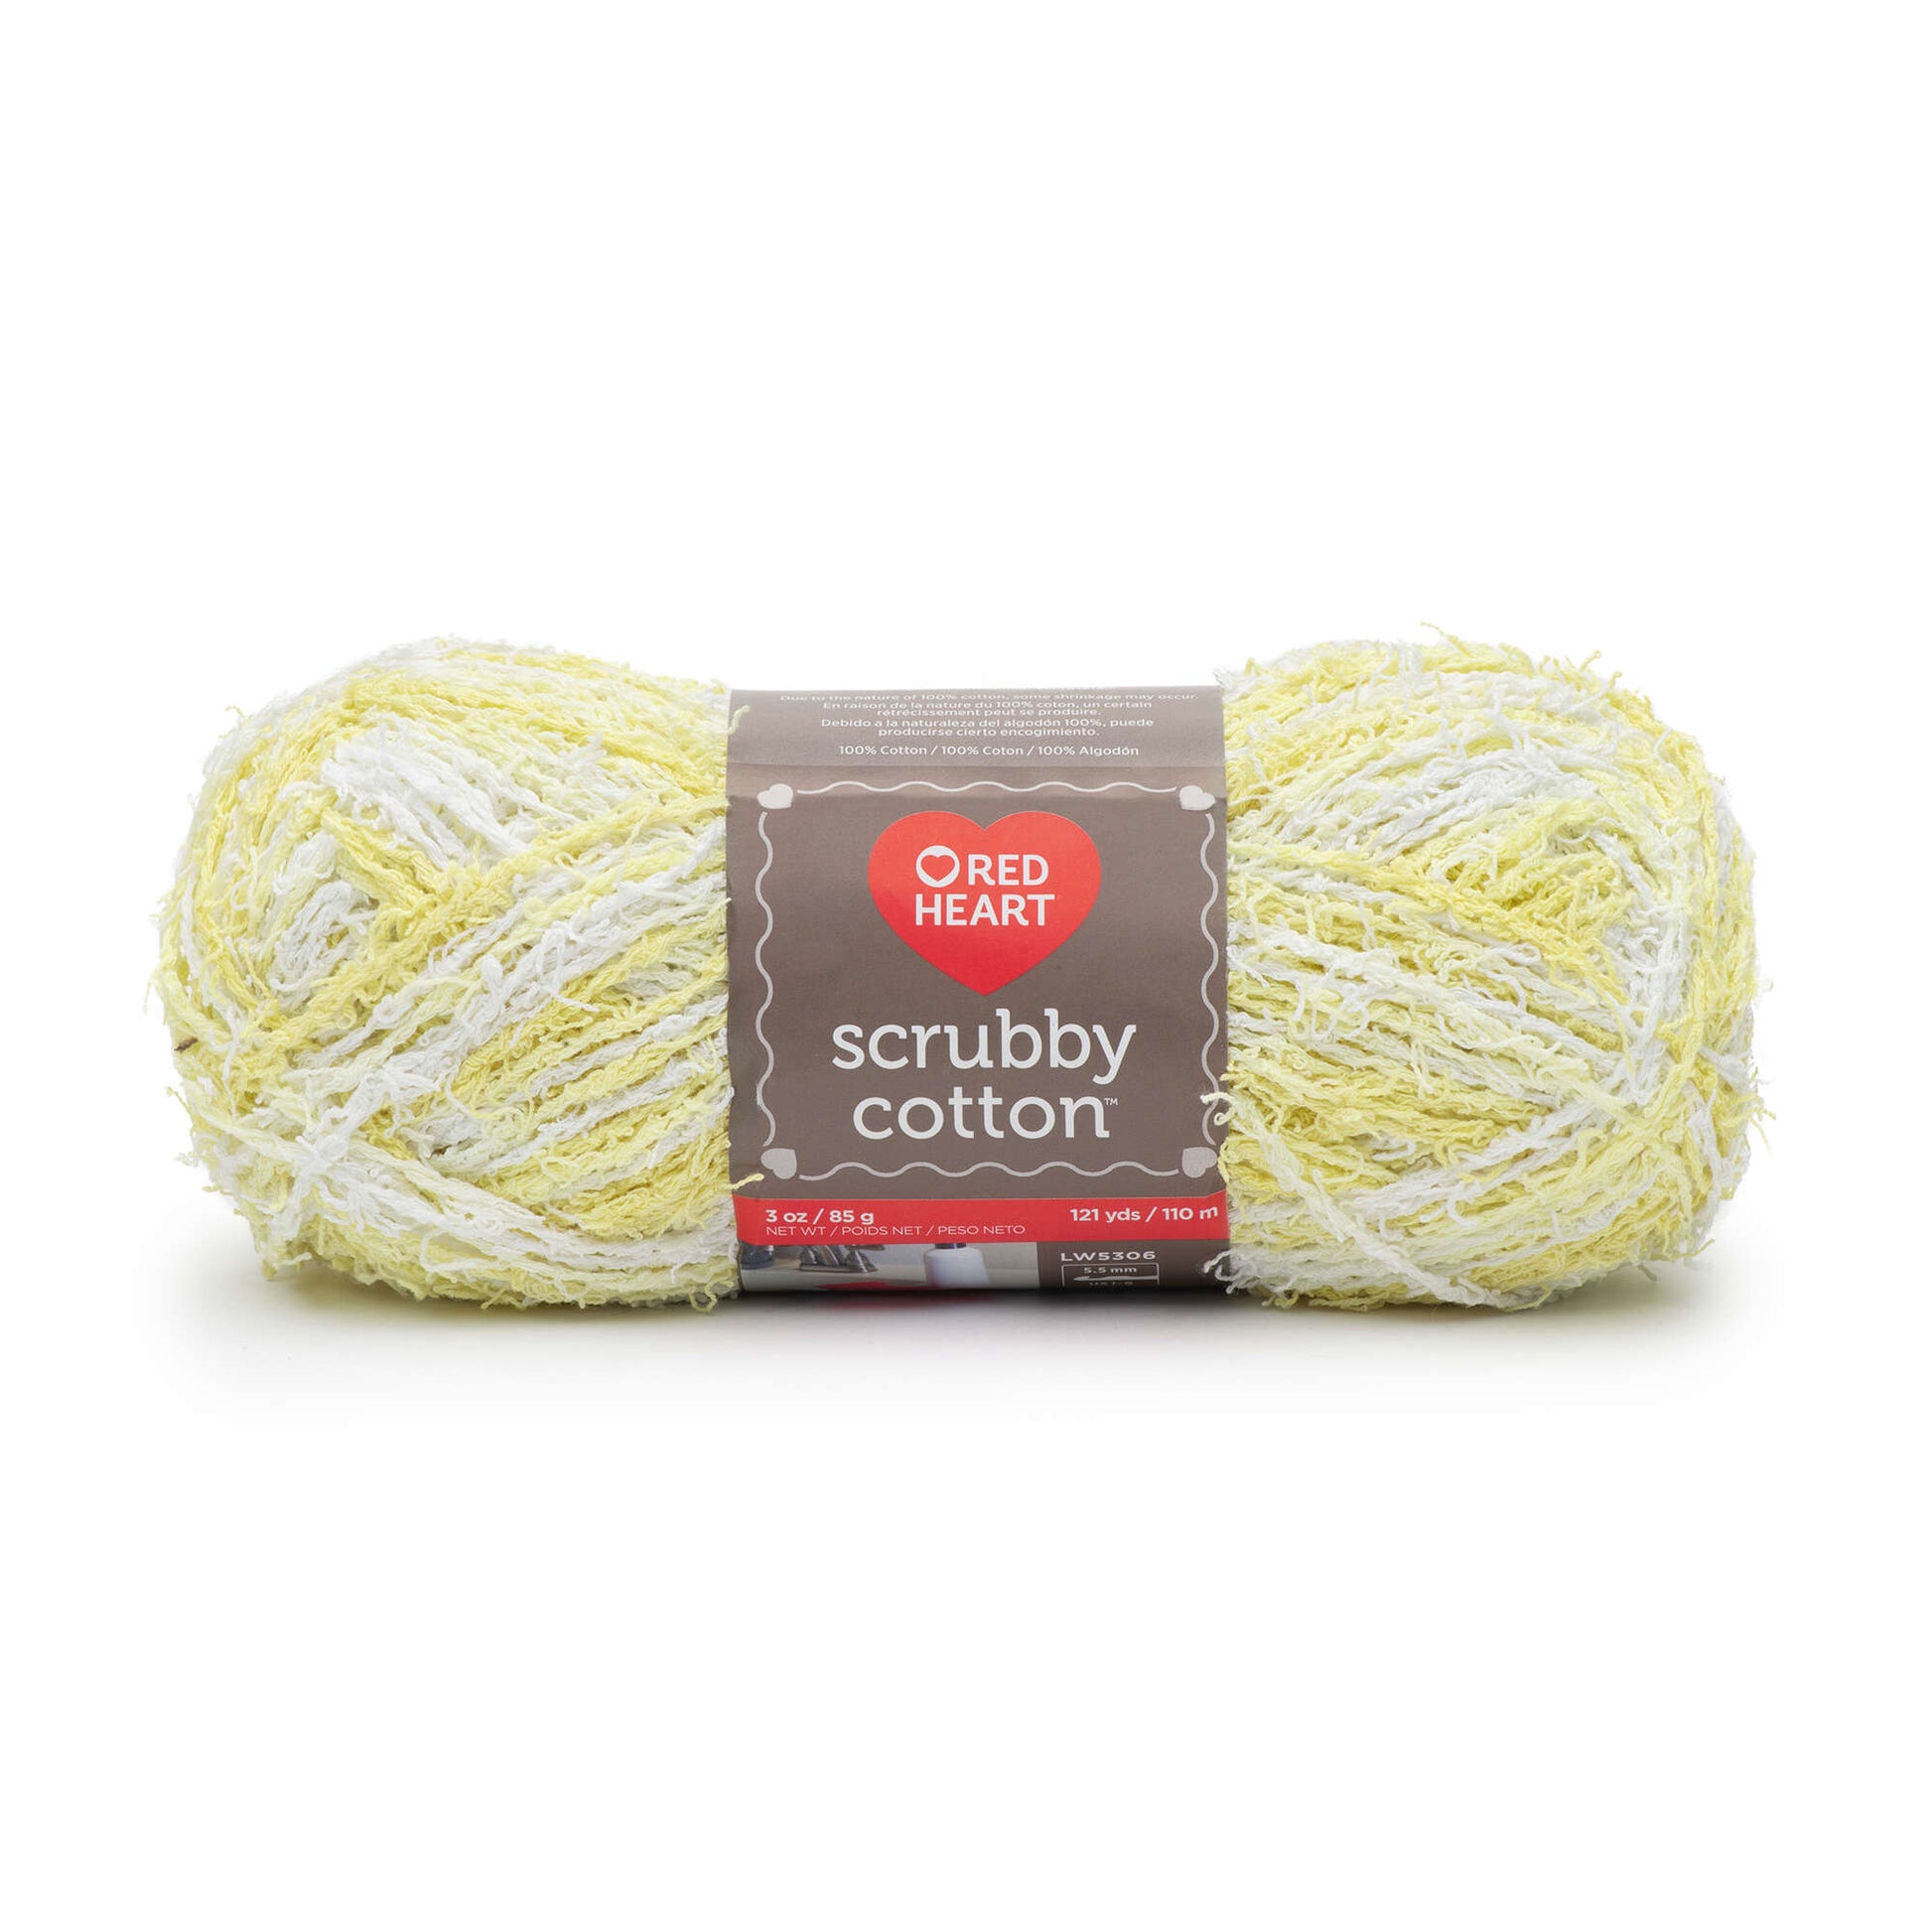 Red Heart Scrubby Cotton Yarn - Discontinued shades Sunshine